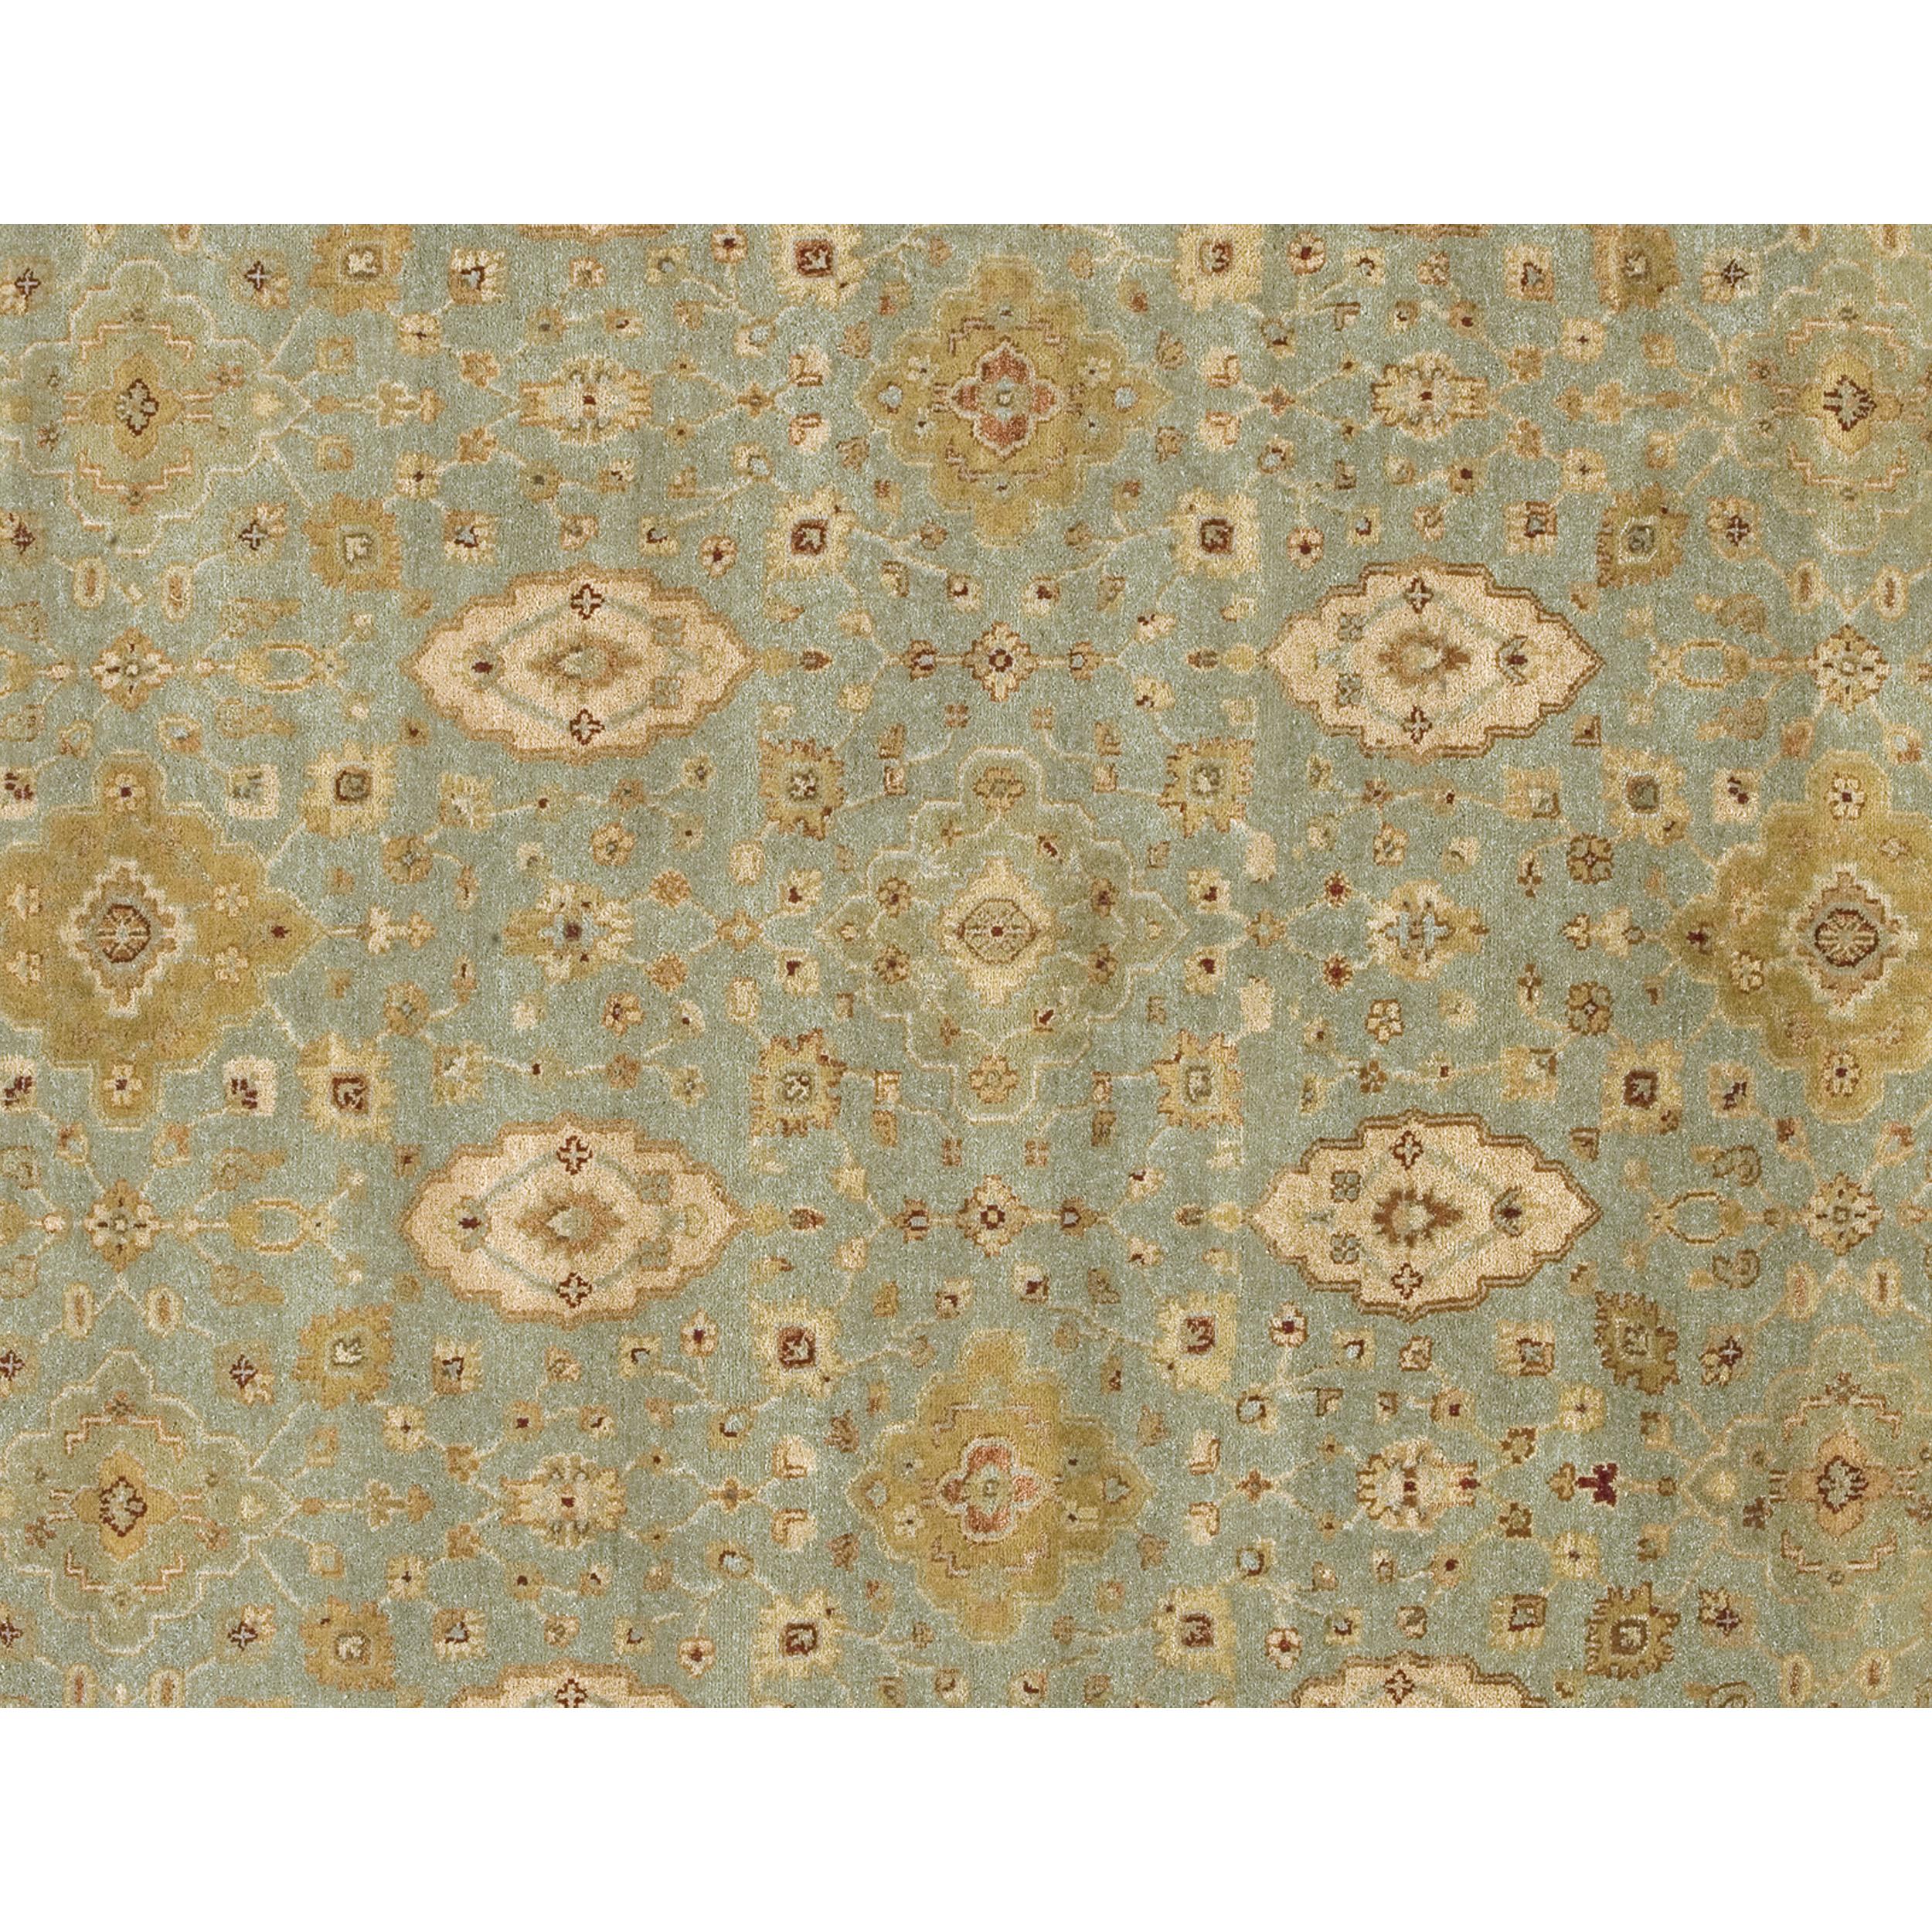 Indian Luxury Traditional Hand-Knotted Vase Aqua & Beige 11x19 Rug For Sale